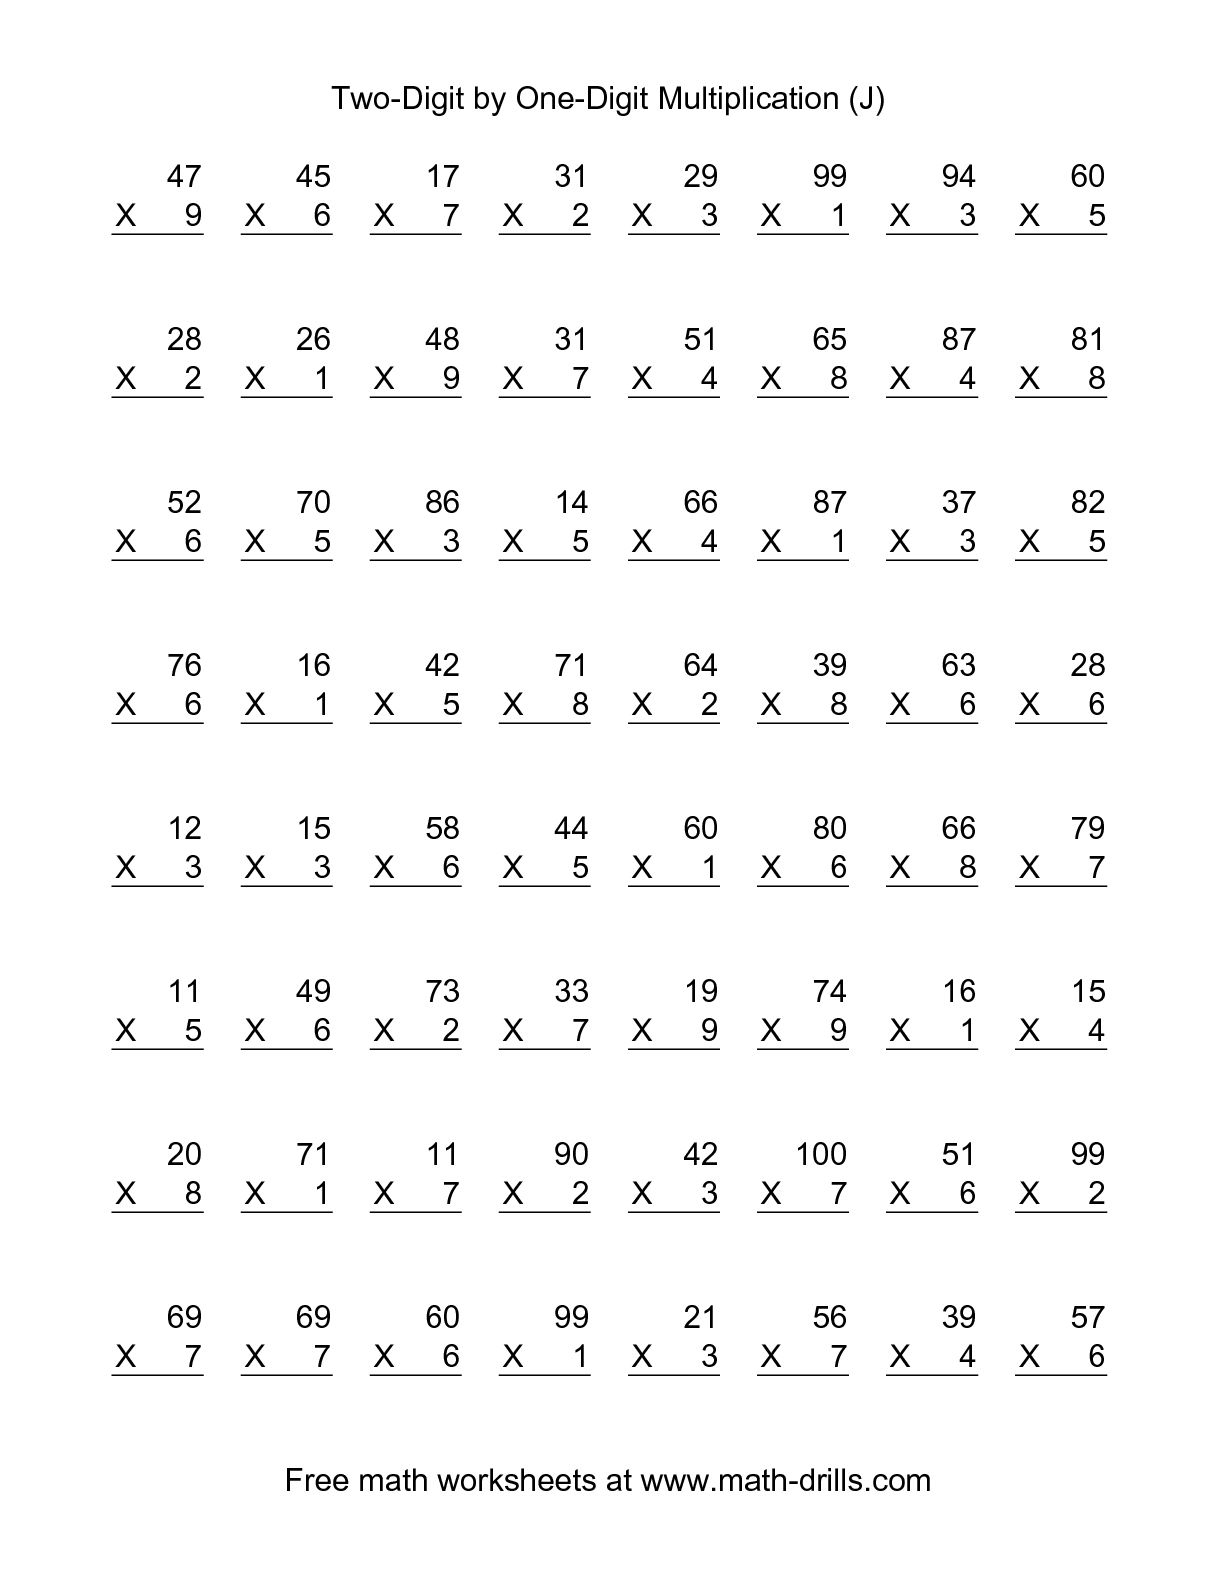 Order Of Operations Math Worksheets 4Th Grade Math Worksheets Algebra Worksheets For 4Th